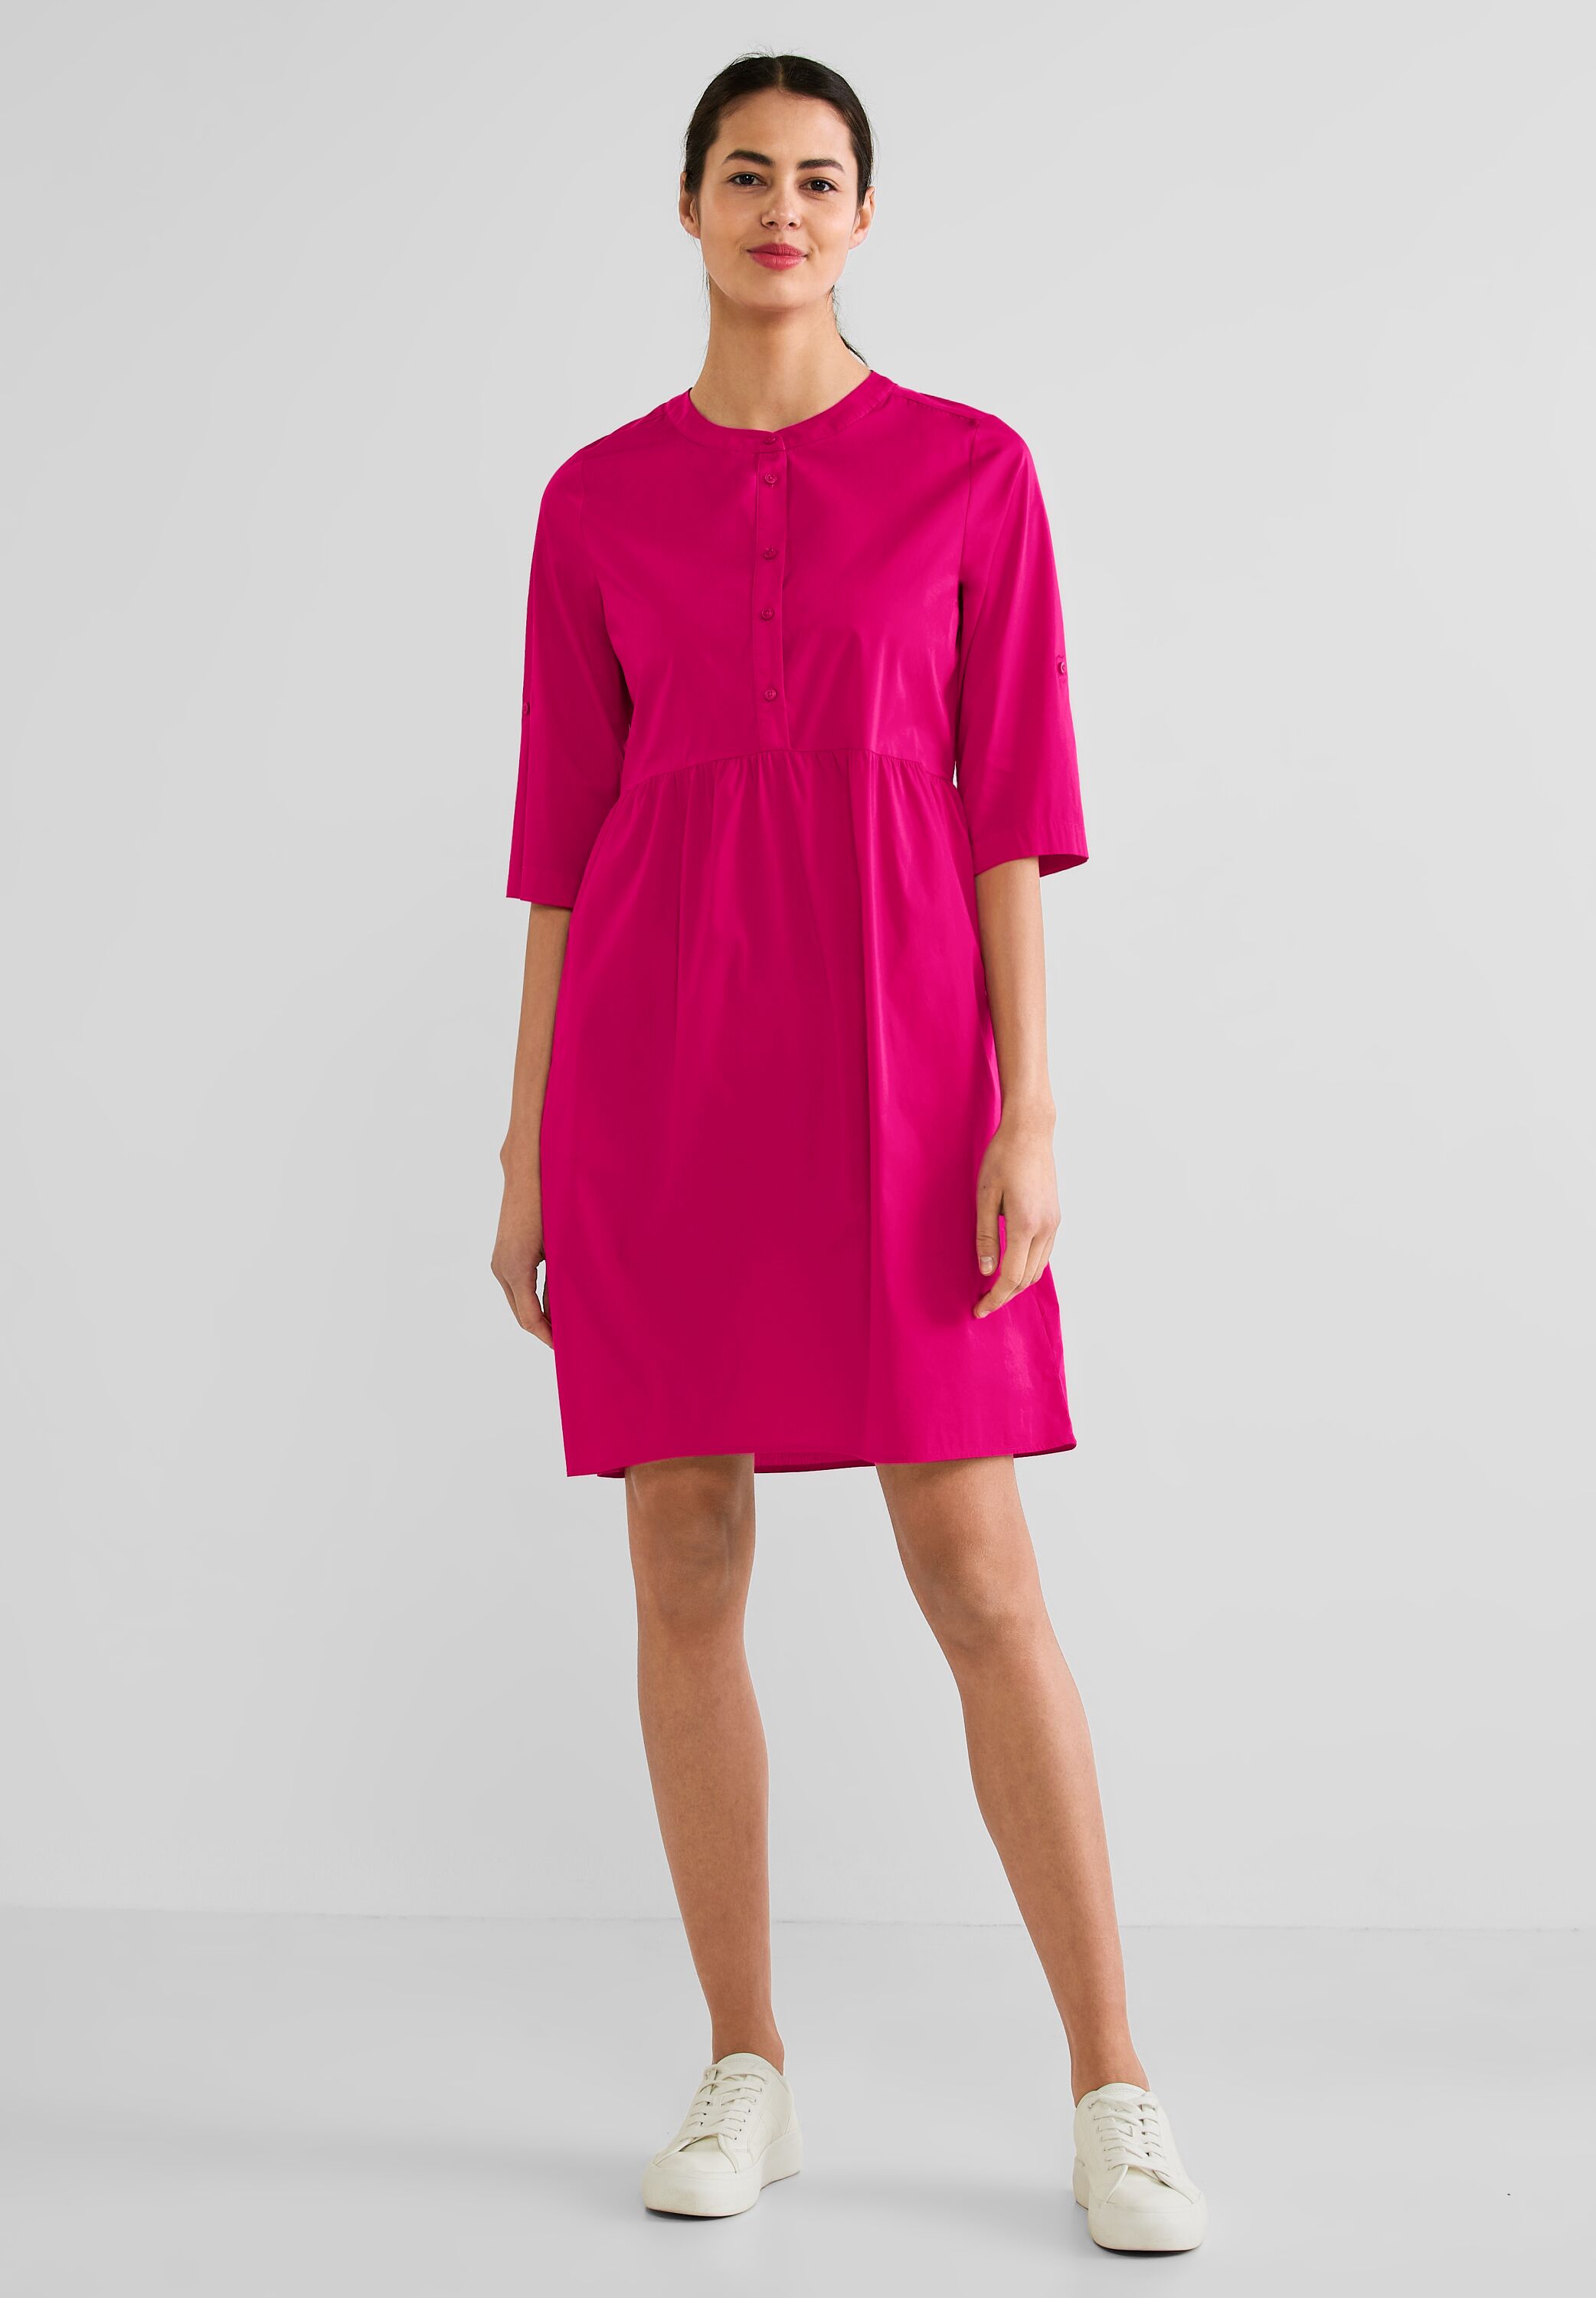 CONCEPT Nu Kleid Street One Mode - Pink A143522-14717 in